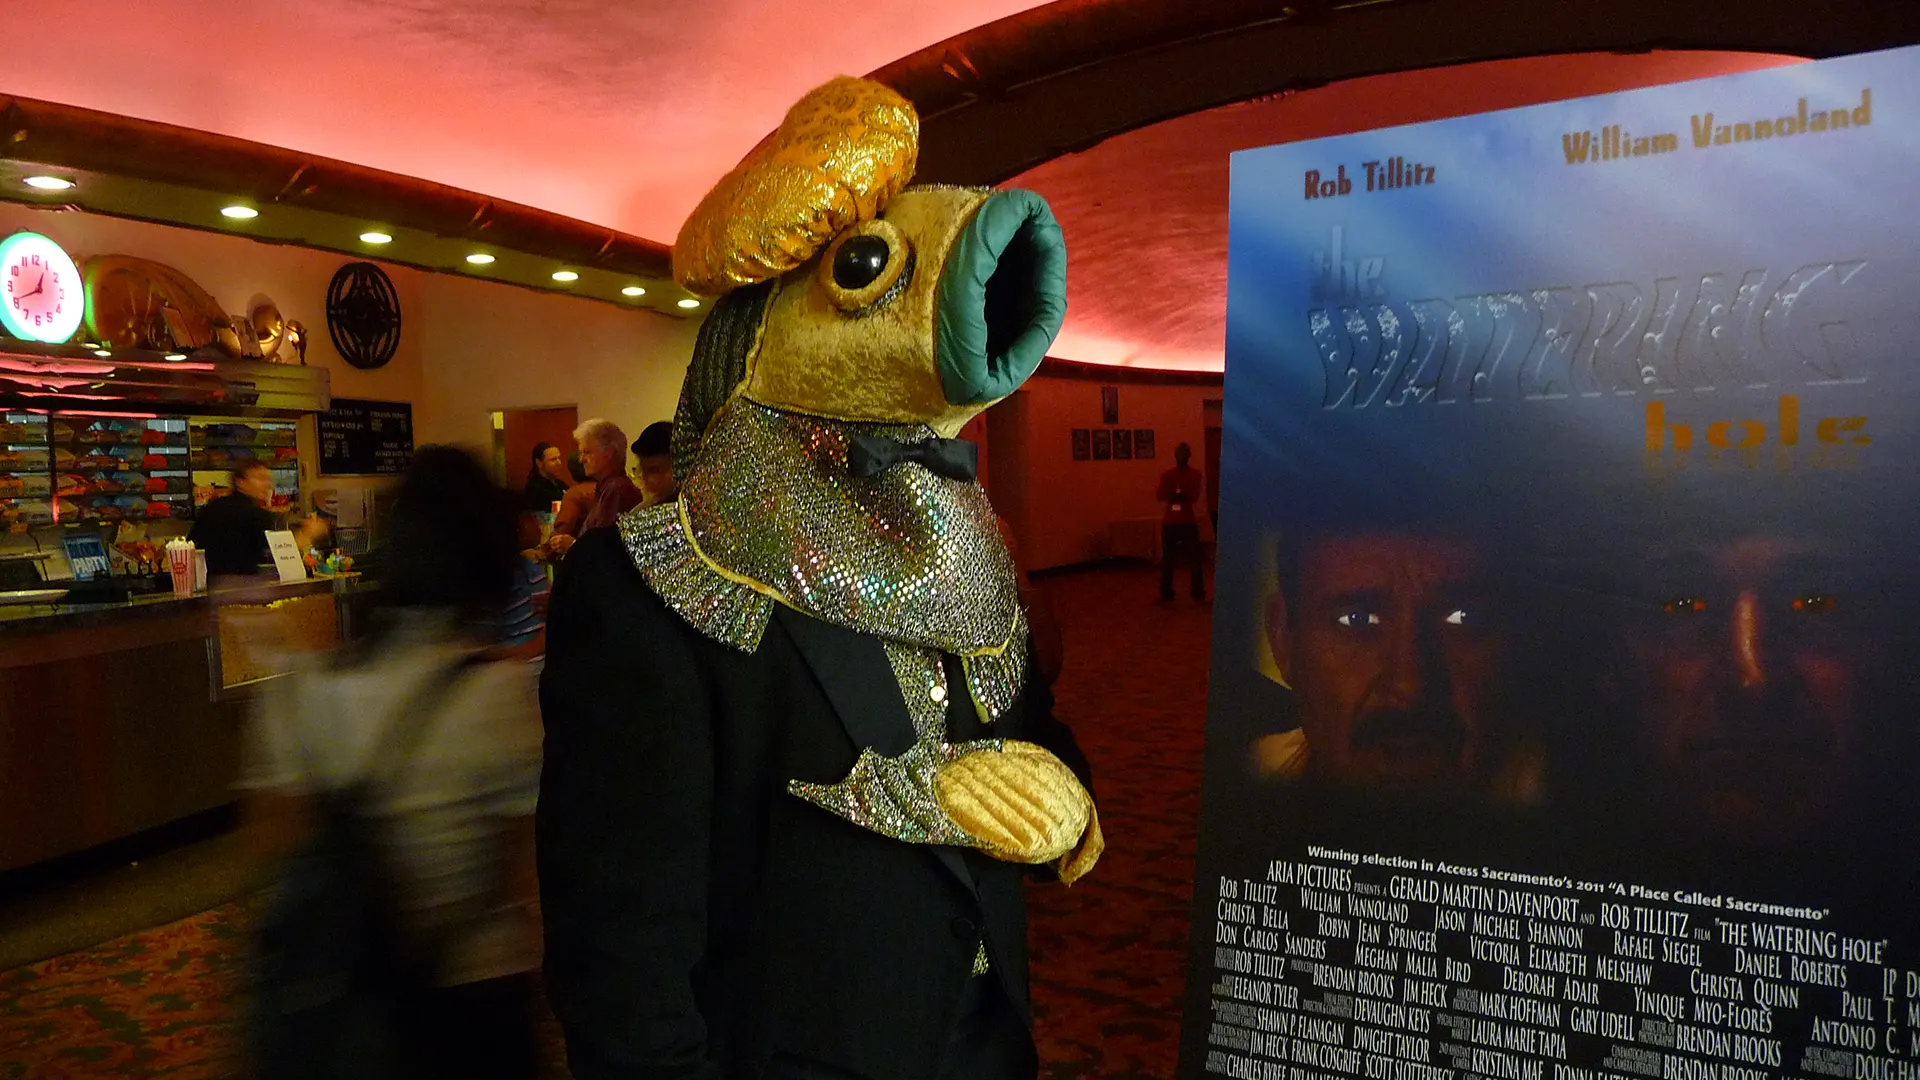 Quentin the Fish with the WATERING hole (2011) poster in the lobby of the Crest Theater in Downtown Sacramento.